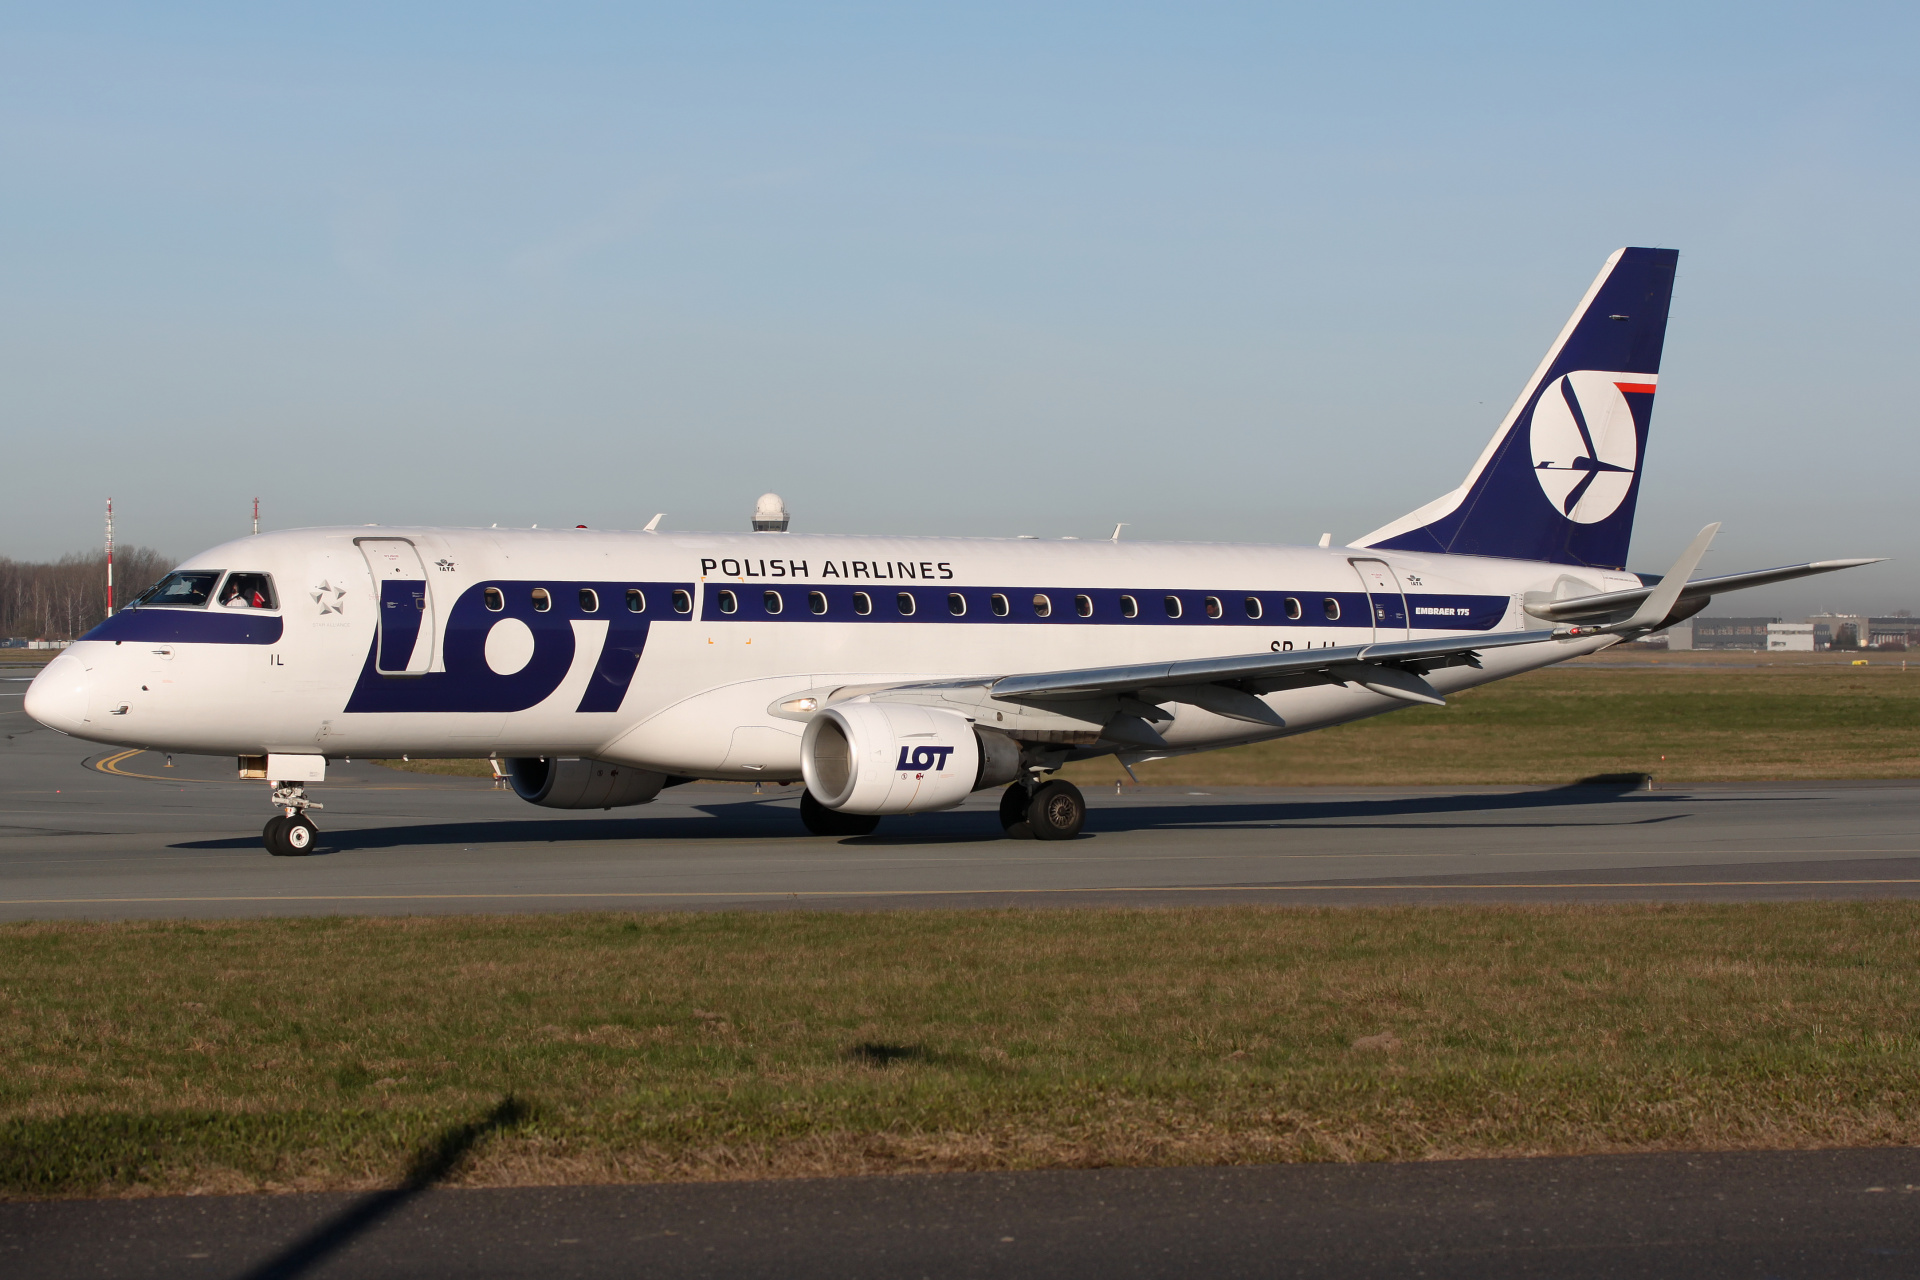 SP-LIL (Aircraft » EPWA Spotting » Embraer E175 » LOT Polish Airlines)